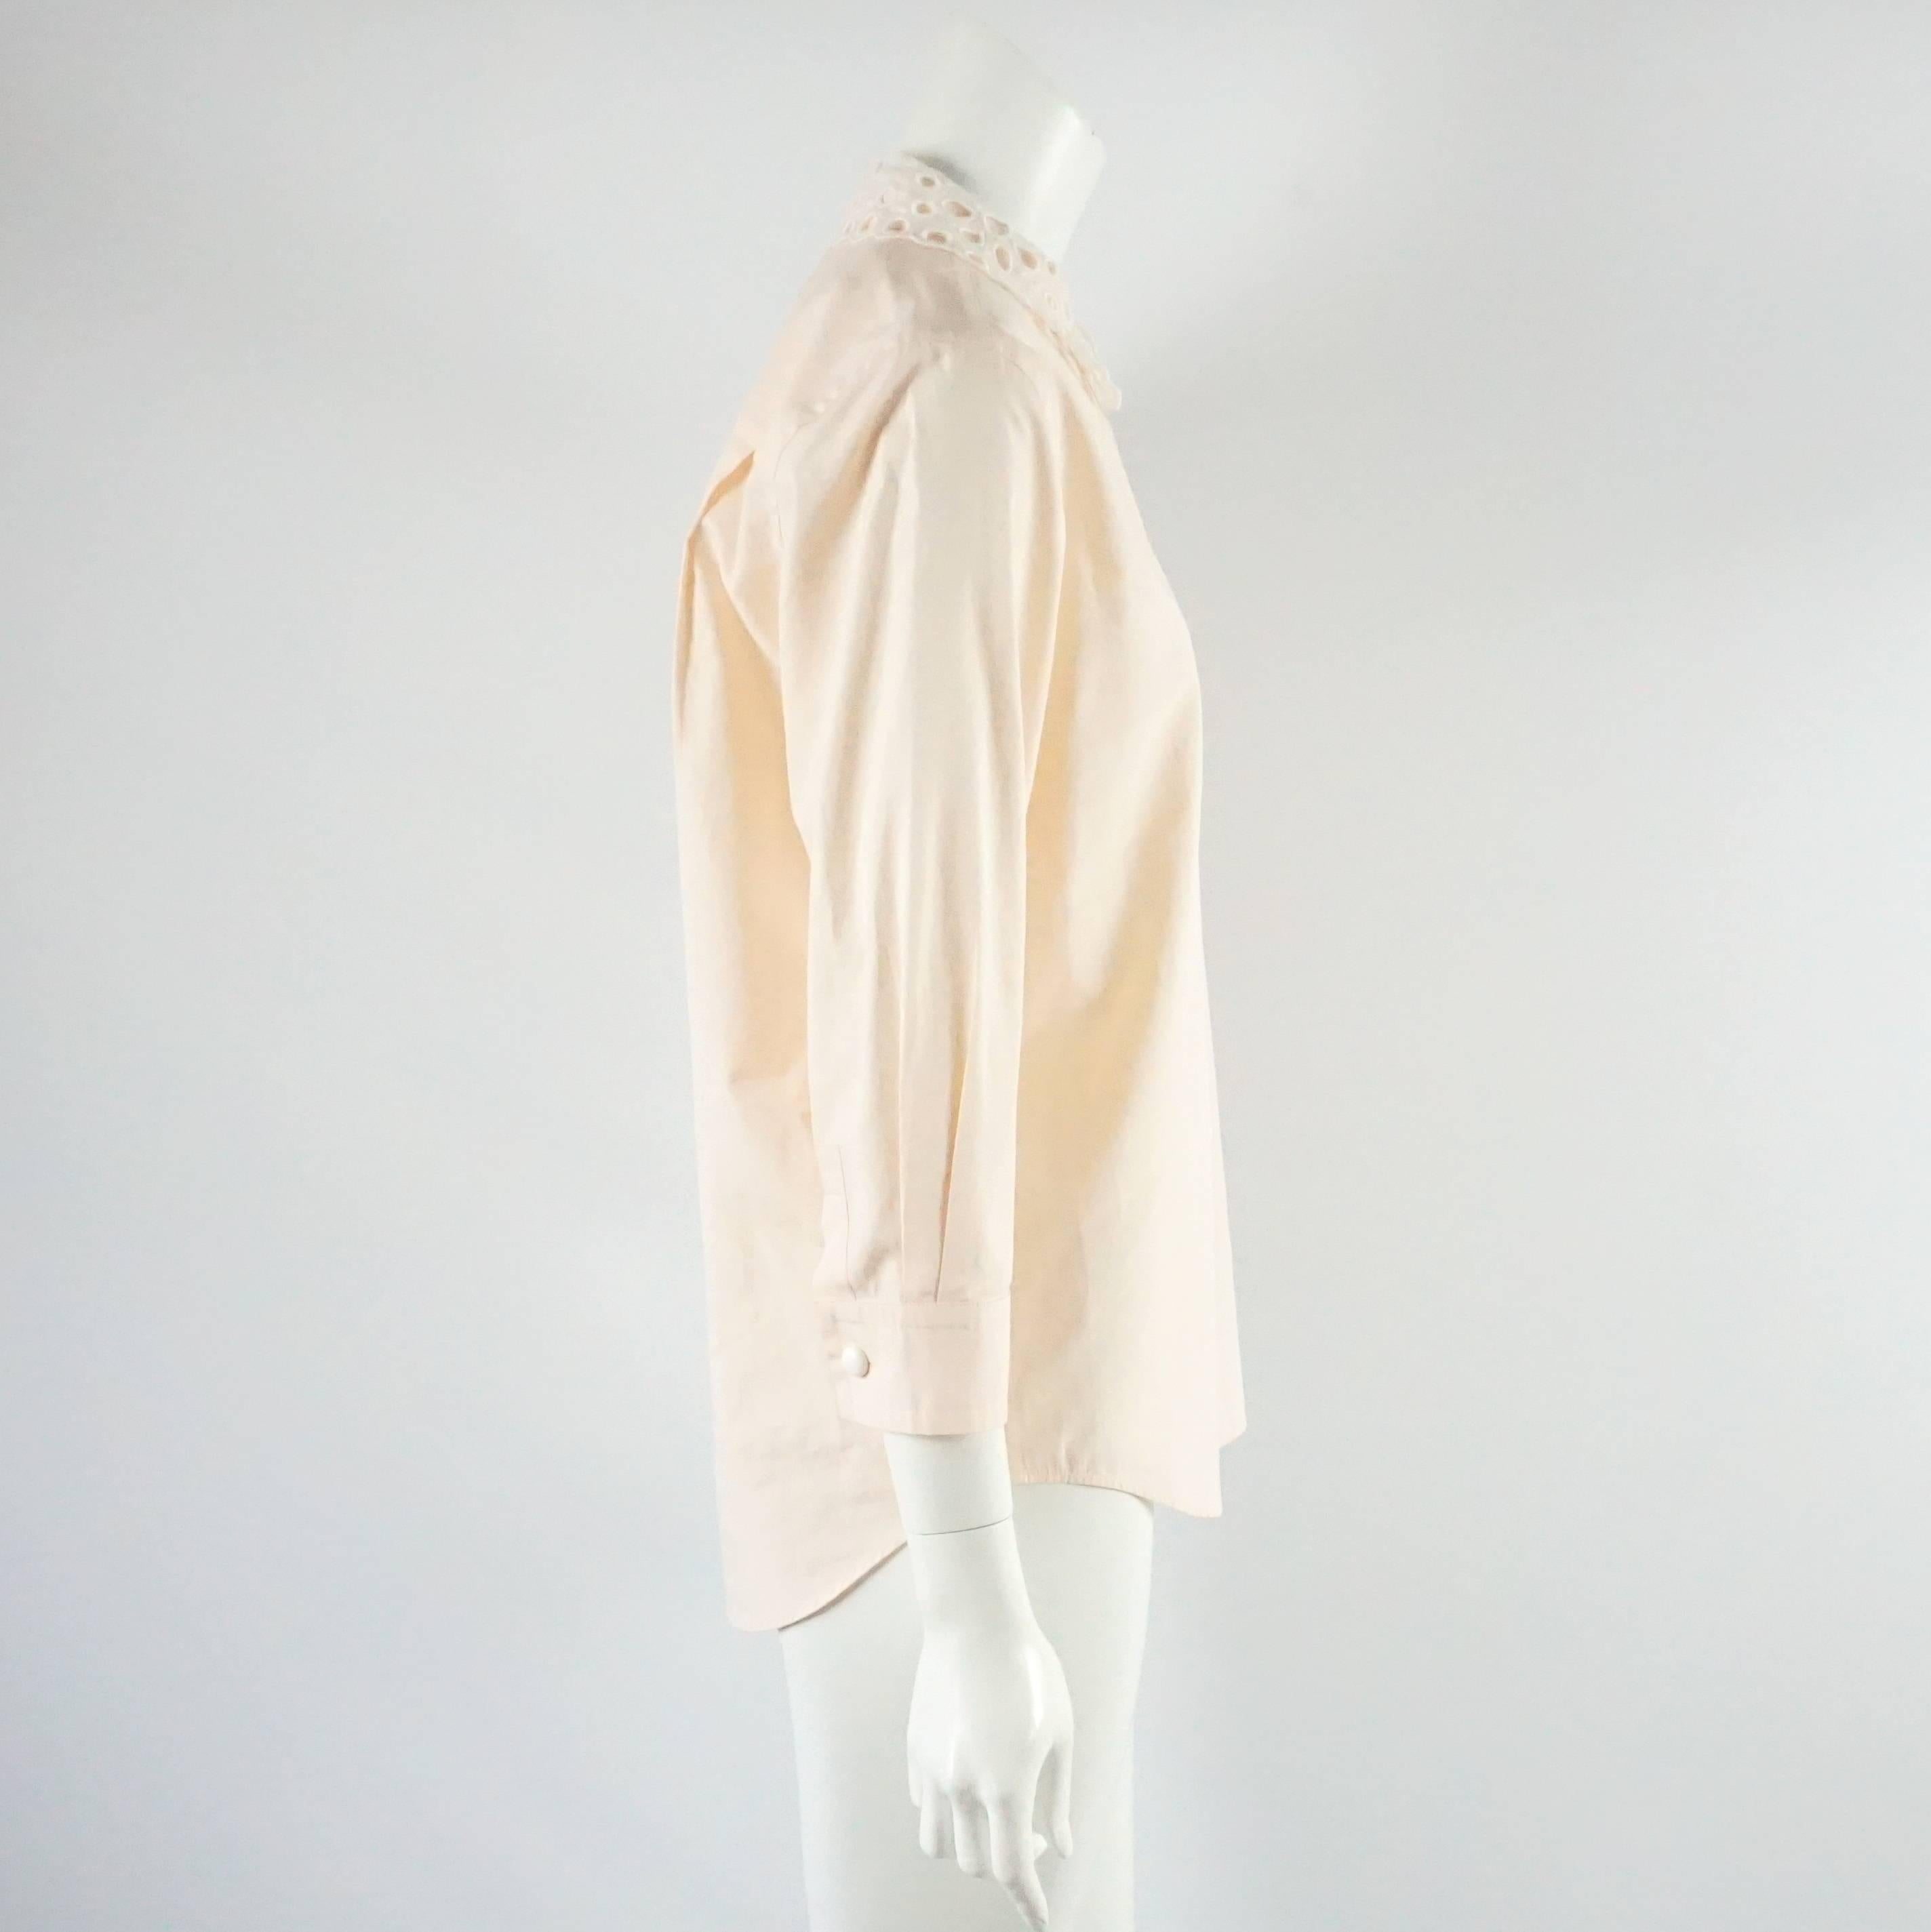 This Louis Vuitton long sleeved top is made of pink / peach colored cotton. It has a removable collar and buttons. This top is in excellent condition. Size 38.

Measurements
Shoulder to Shoulder: 16.25"
Sleeve Length: 19.25"
Bust: